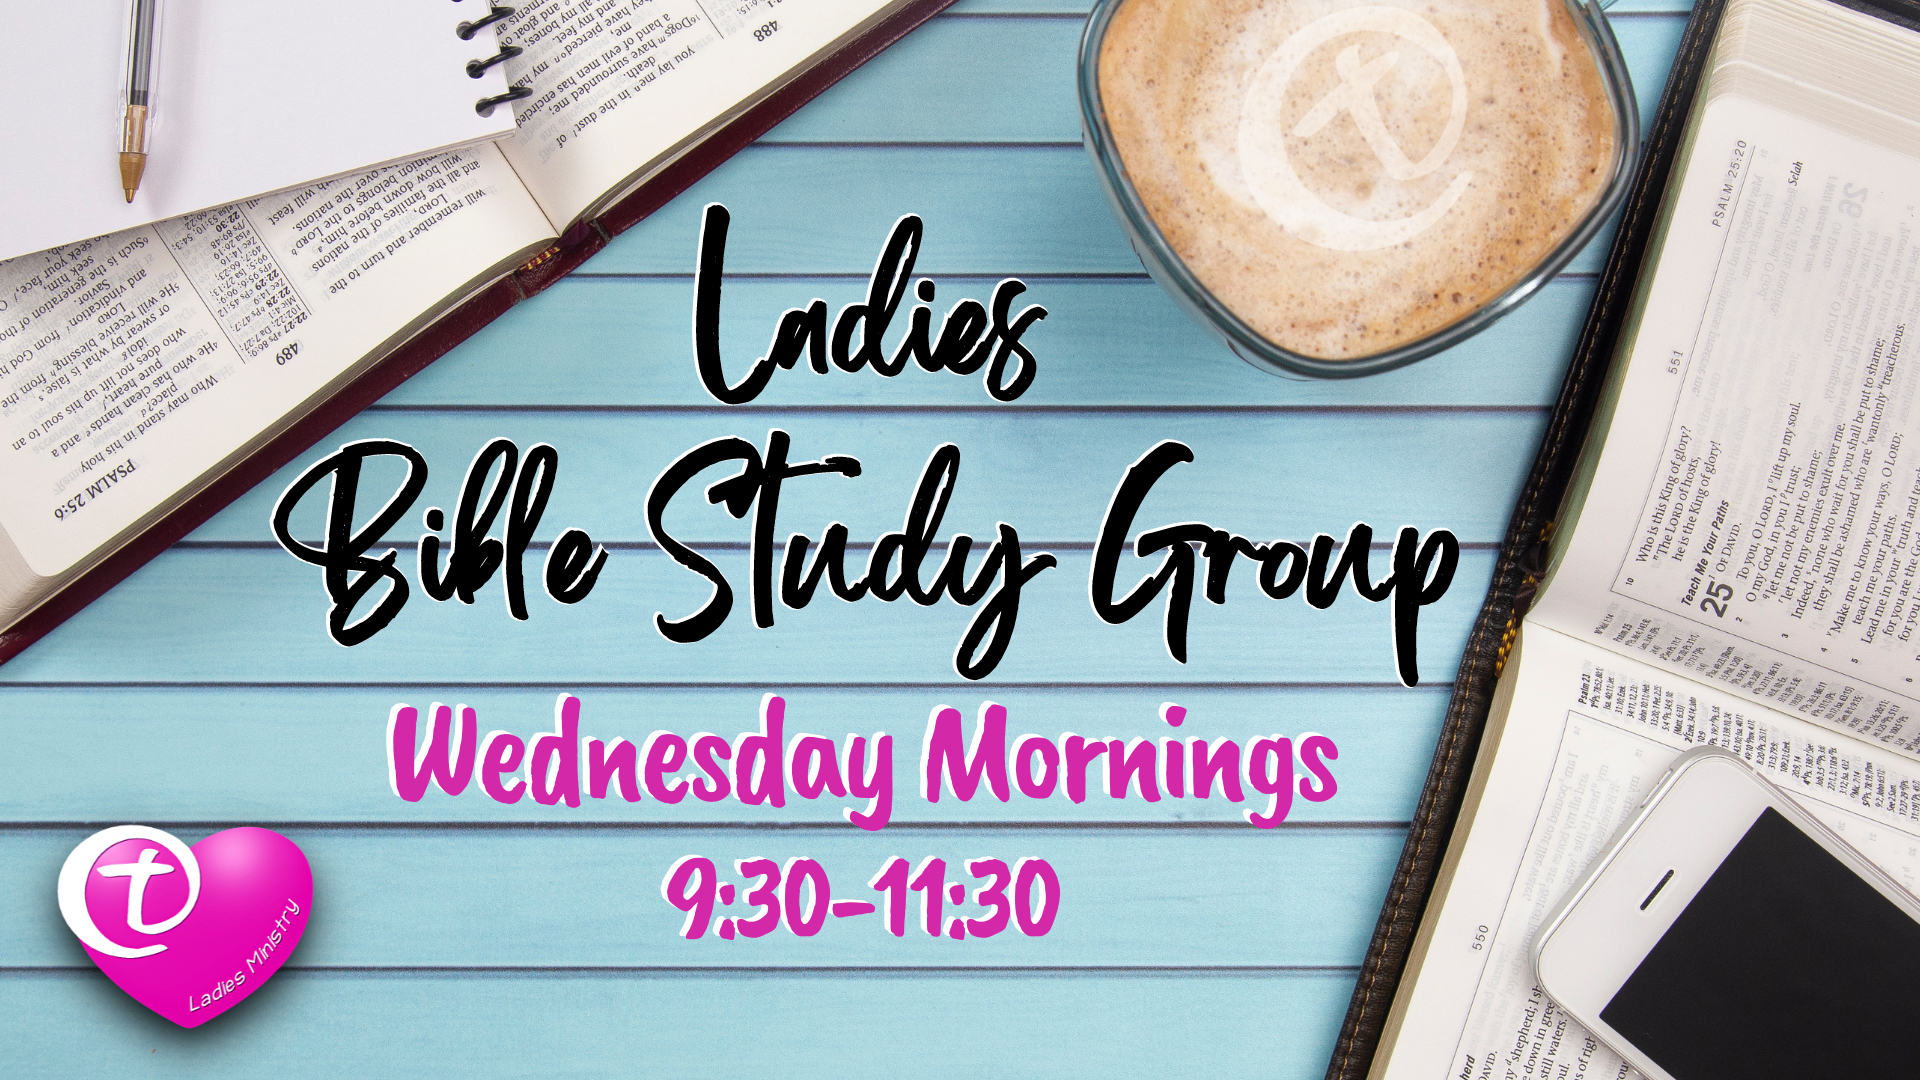 Ladies Bible Study Group (no childcare)